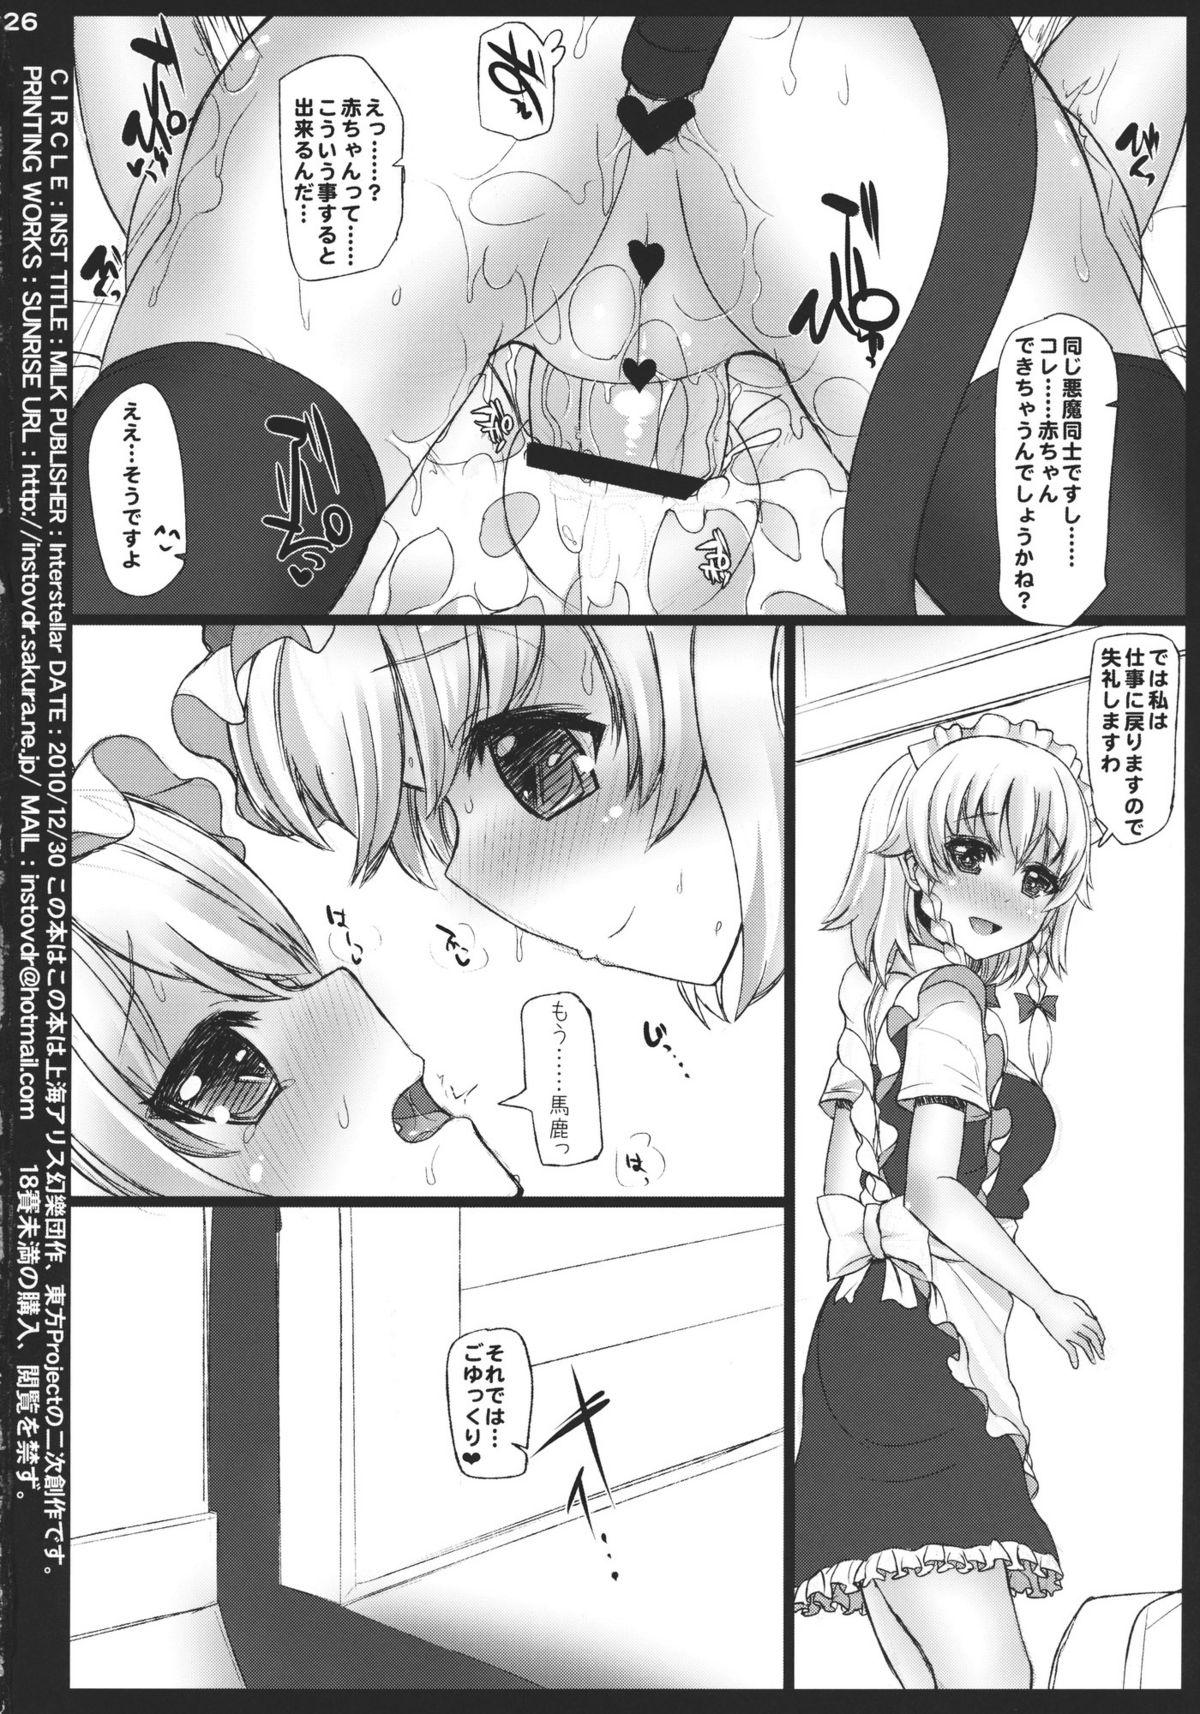 Parody MILK - Touhou project Red - Page 26